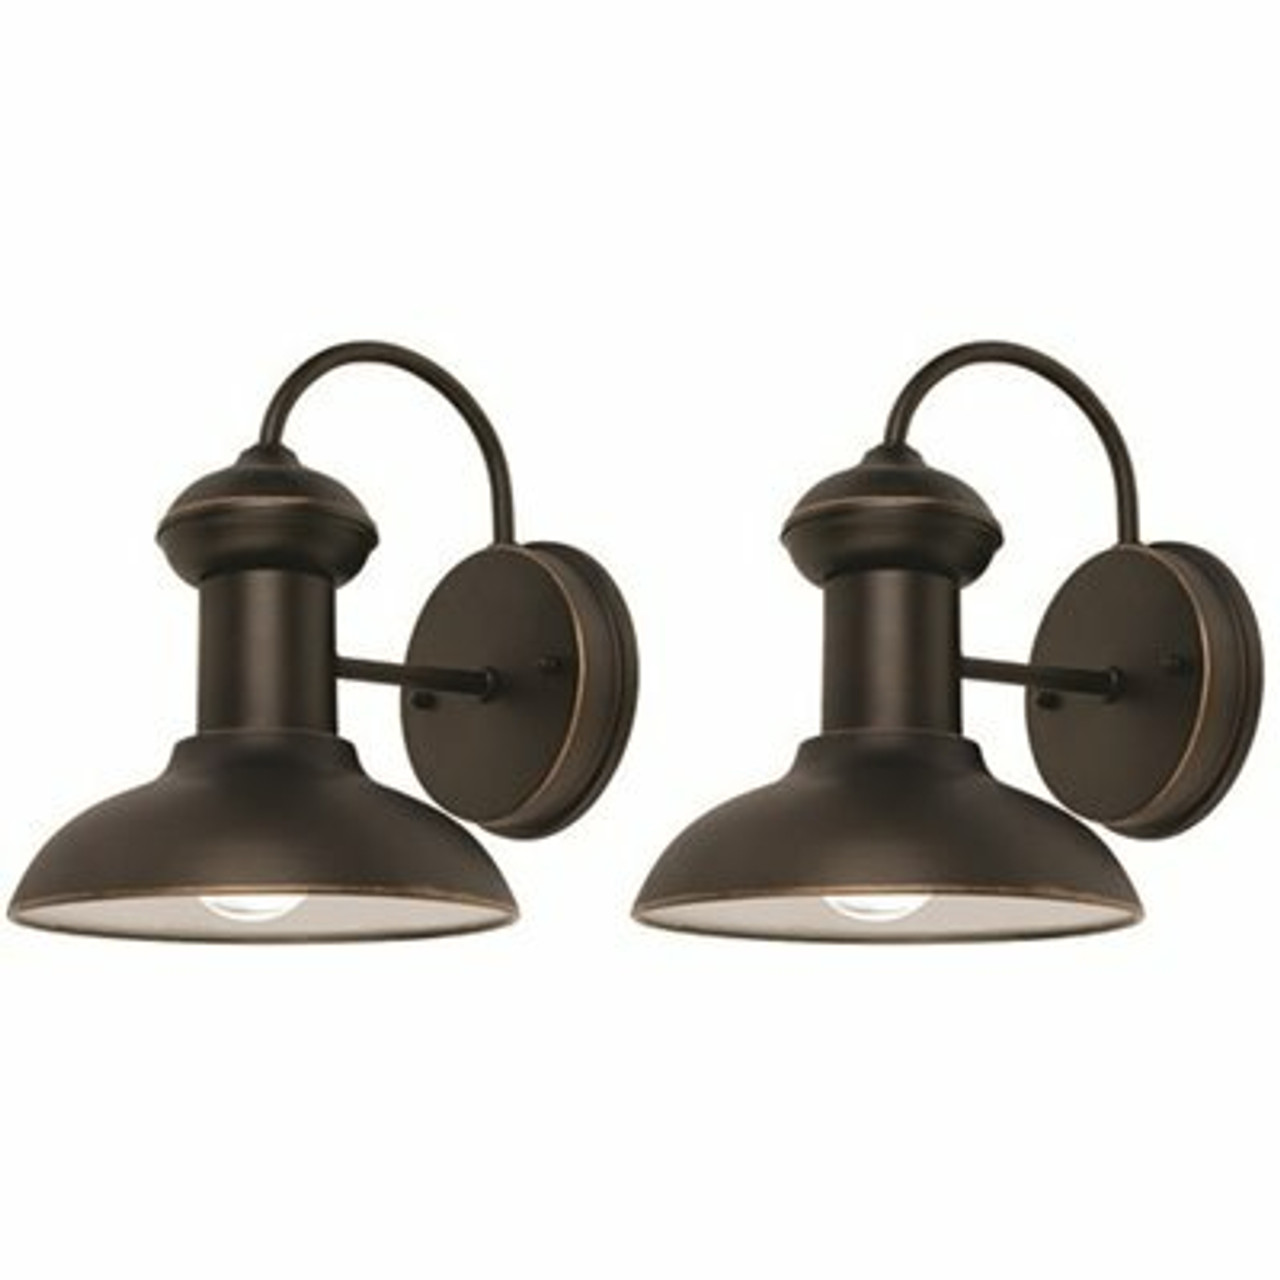 Globe Electric Jameson 1-Light Oil Rubbed Bronze Outdoor Wall Lantern Sconce (2-Pack)